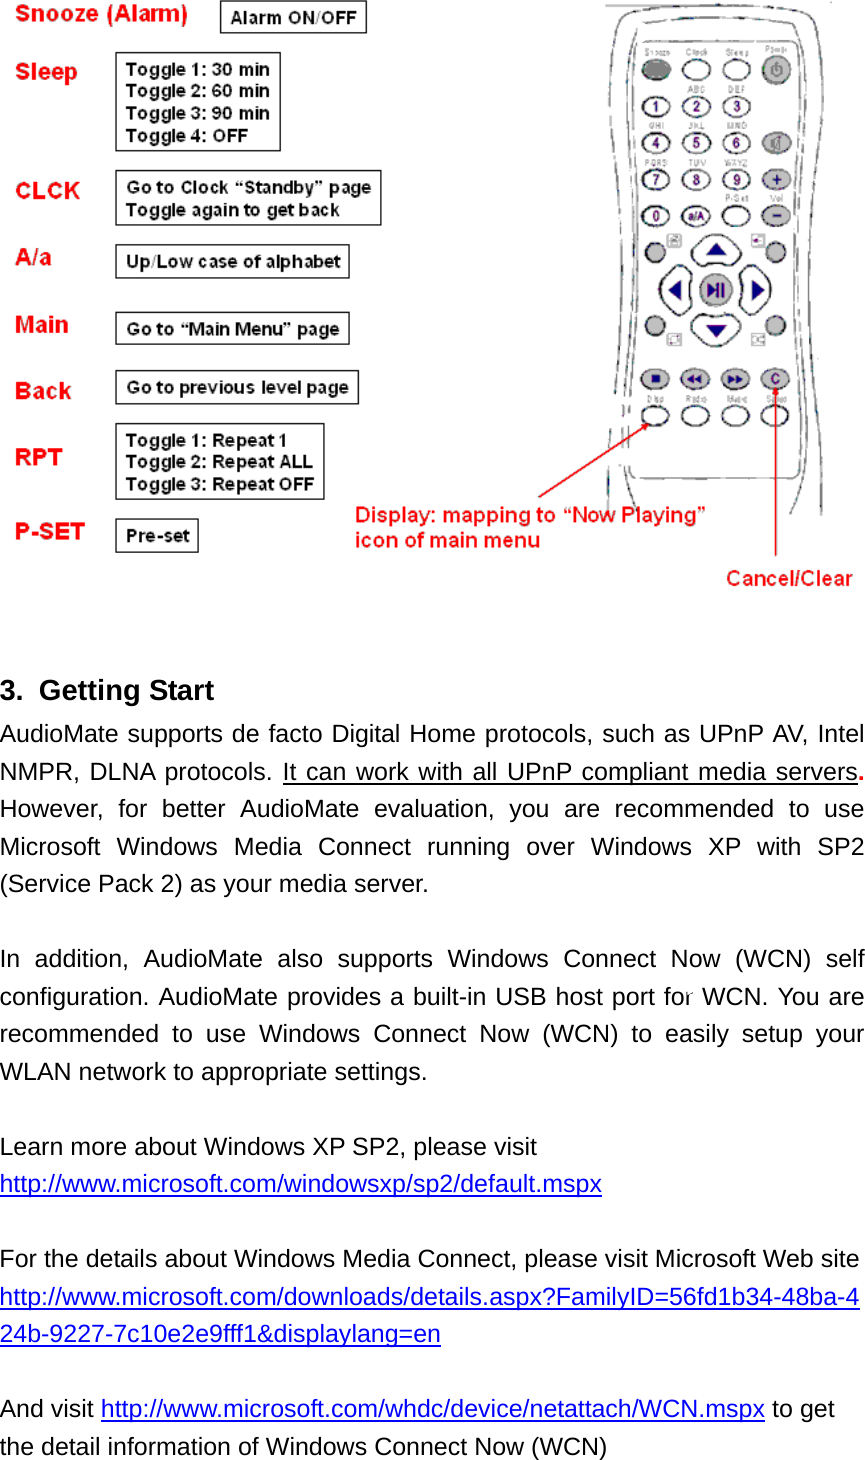   3. Getting Start AudioMate supports de facto Digital Home protocols, such as UPnP AV, Intel NMPR, DLNA protocols. It can work with all UPnP compliant media servers. However, for better AudioMate evaluation, you are recommended to use Microsoft Windows Media Connect running over Windows XP with SP2 (Service Pack 2) as your media server.  In addition, AudioMate also supports Windows Connect Now (WCN) self configuration. AudioMate provides a built-in USB host port for WCN. You are recommended to use Windows Connect Now (WCN) to easily setup your WLAN network to appropriate settings.  Learn more about Windows XP SP2, please visit http://www.microsoft.com/windowsxp/sp2/default.mspx  For the details about Windows Media Connect, please visit Microsoft Web site   http://www.microsoft.com/downloads/details.aspx?FamilyID=56fd1b34-48ba-424b-9227-7c10e2e9fff1&amp;displaylang=en  And visit http://www.microsoft.com/whdc/device/netattach/WCN.mspx to get the detail information of Windows Connect Now (WCN) 